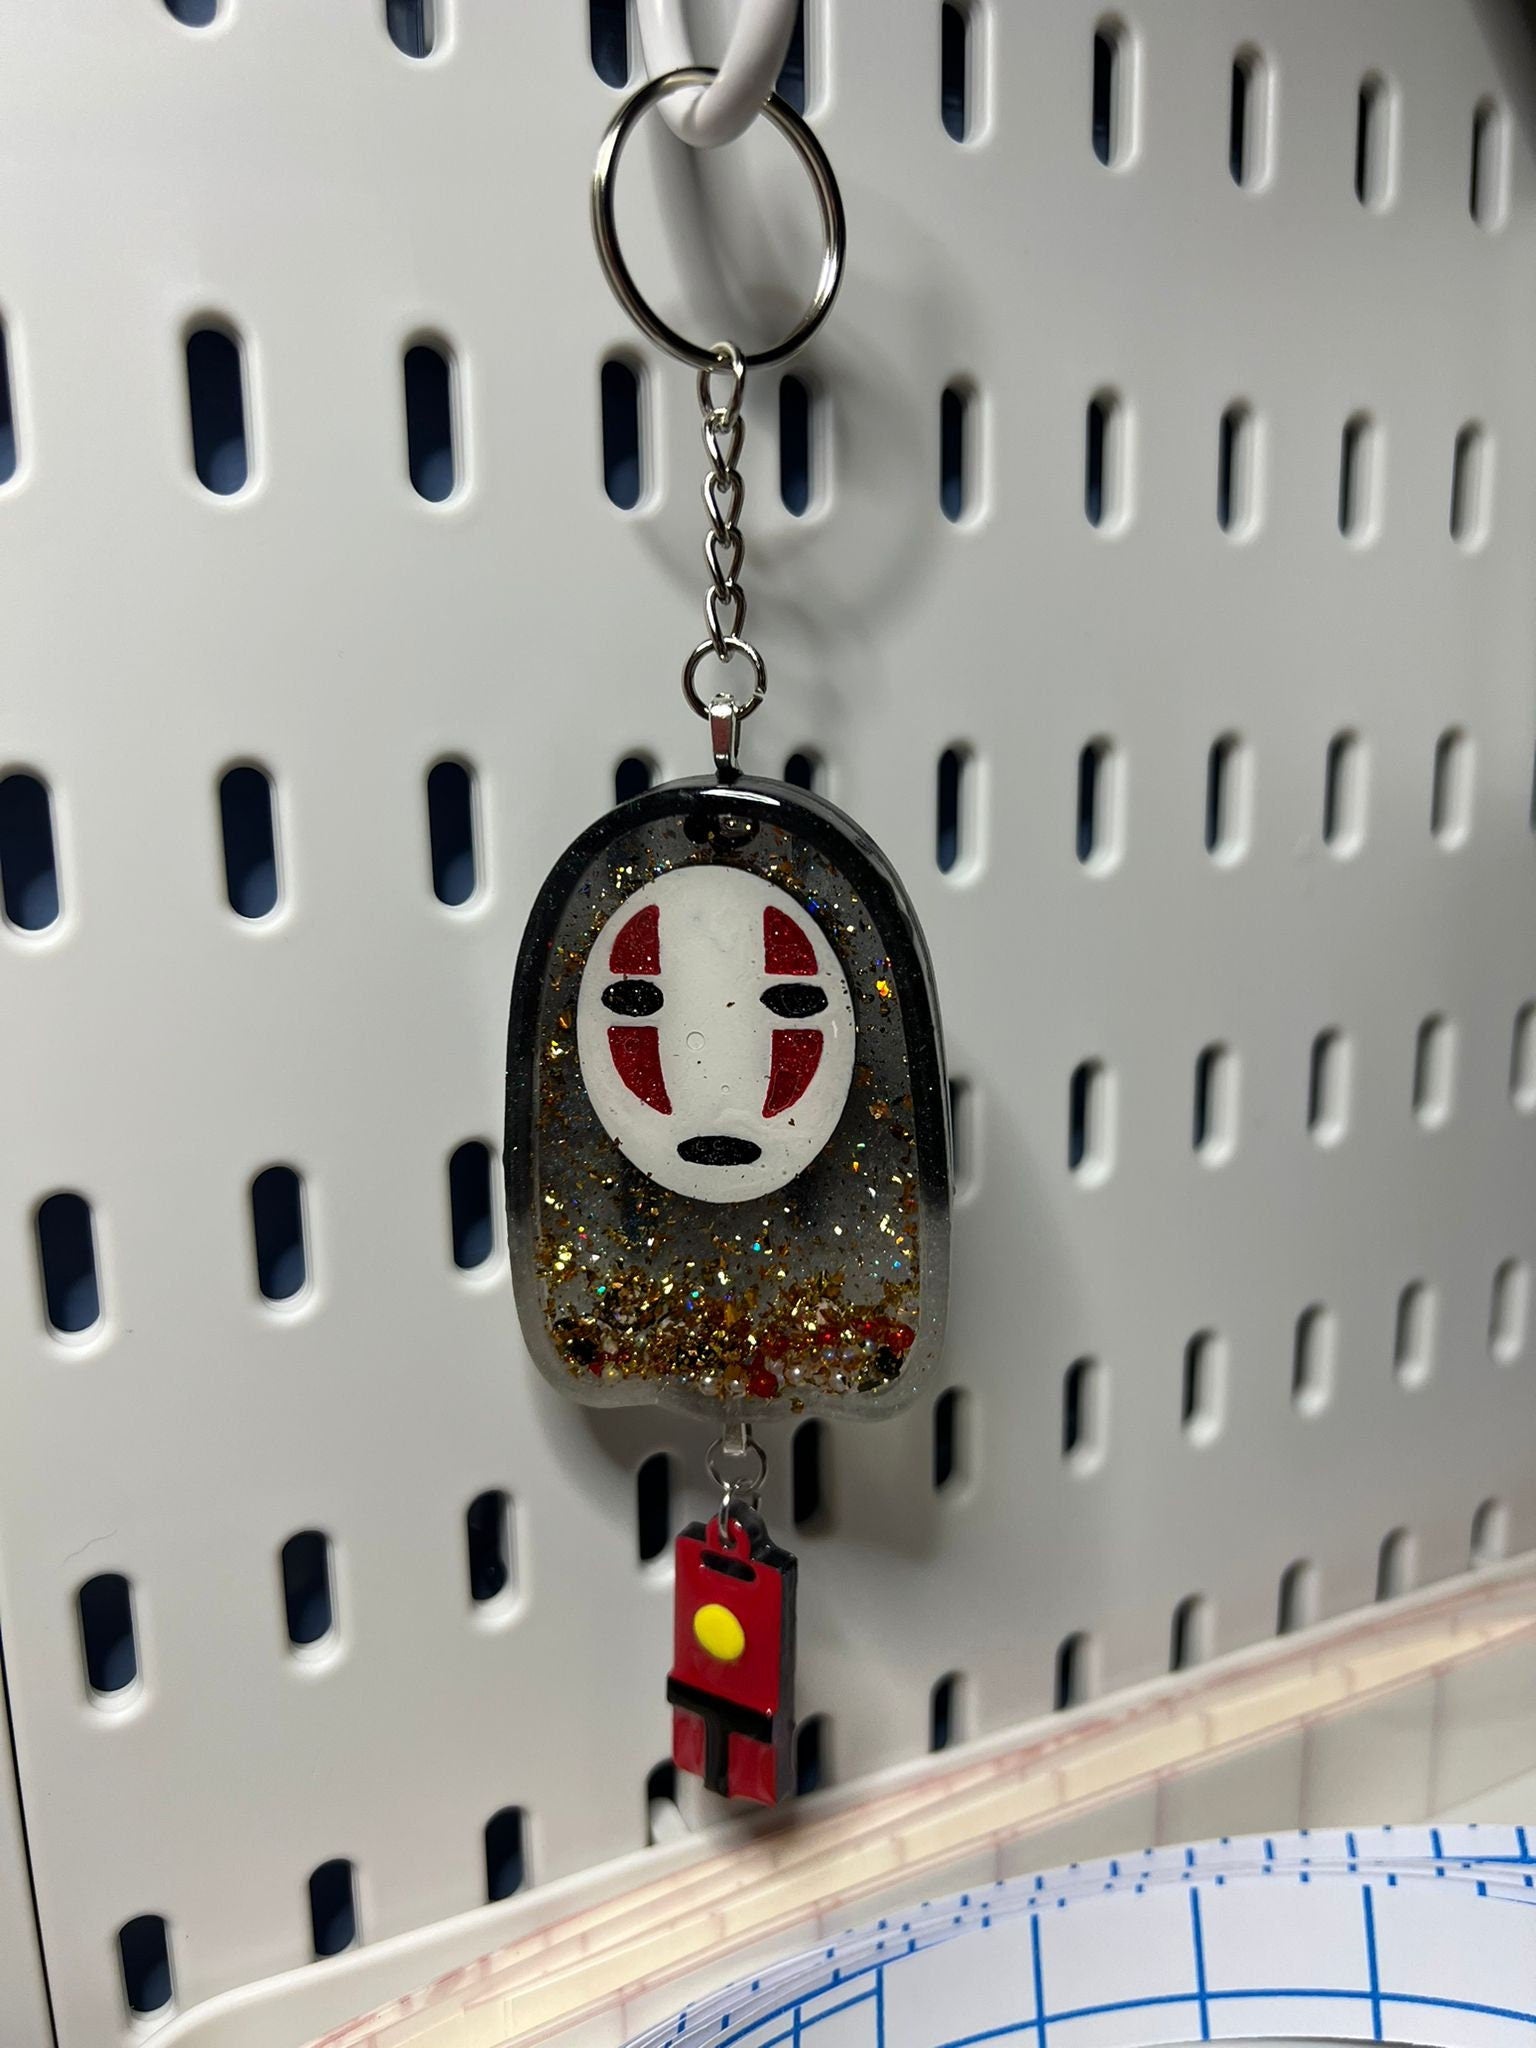 No-Face Shaker Keychain - Gold And Holographic Fillers - Hand-Painted Details - Resin Crafts